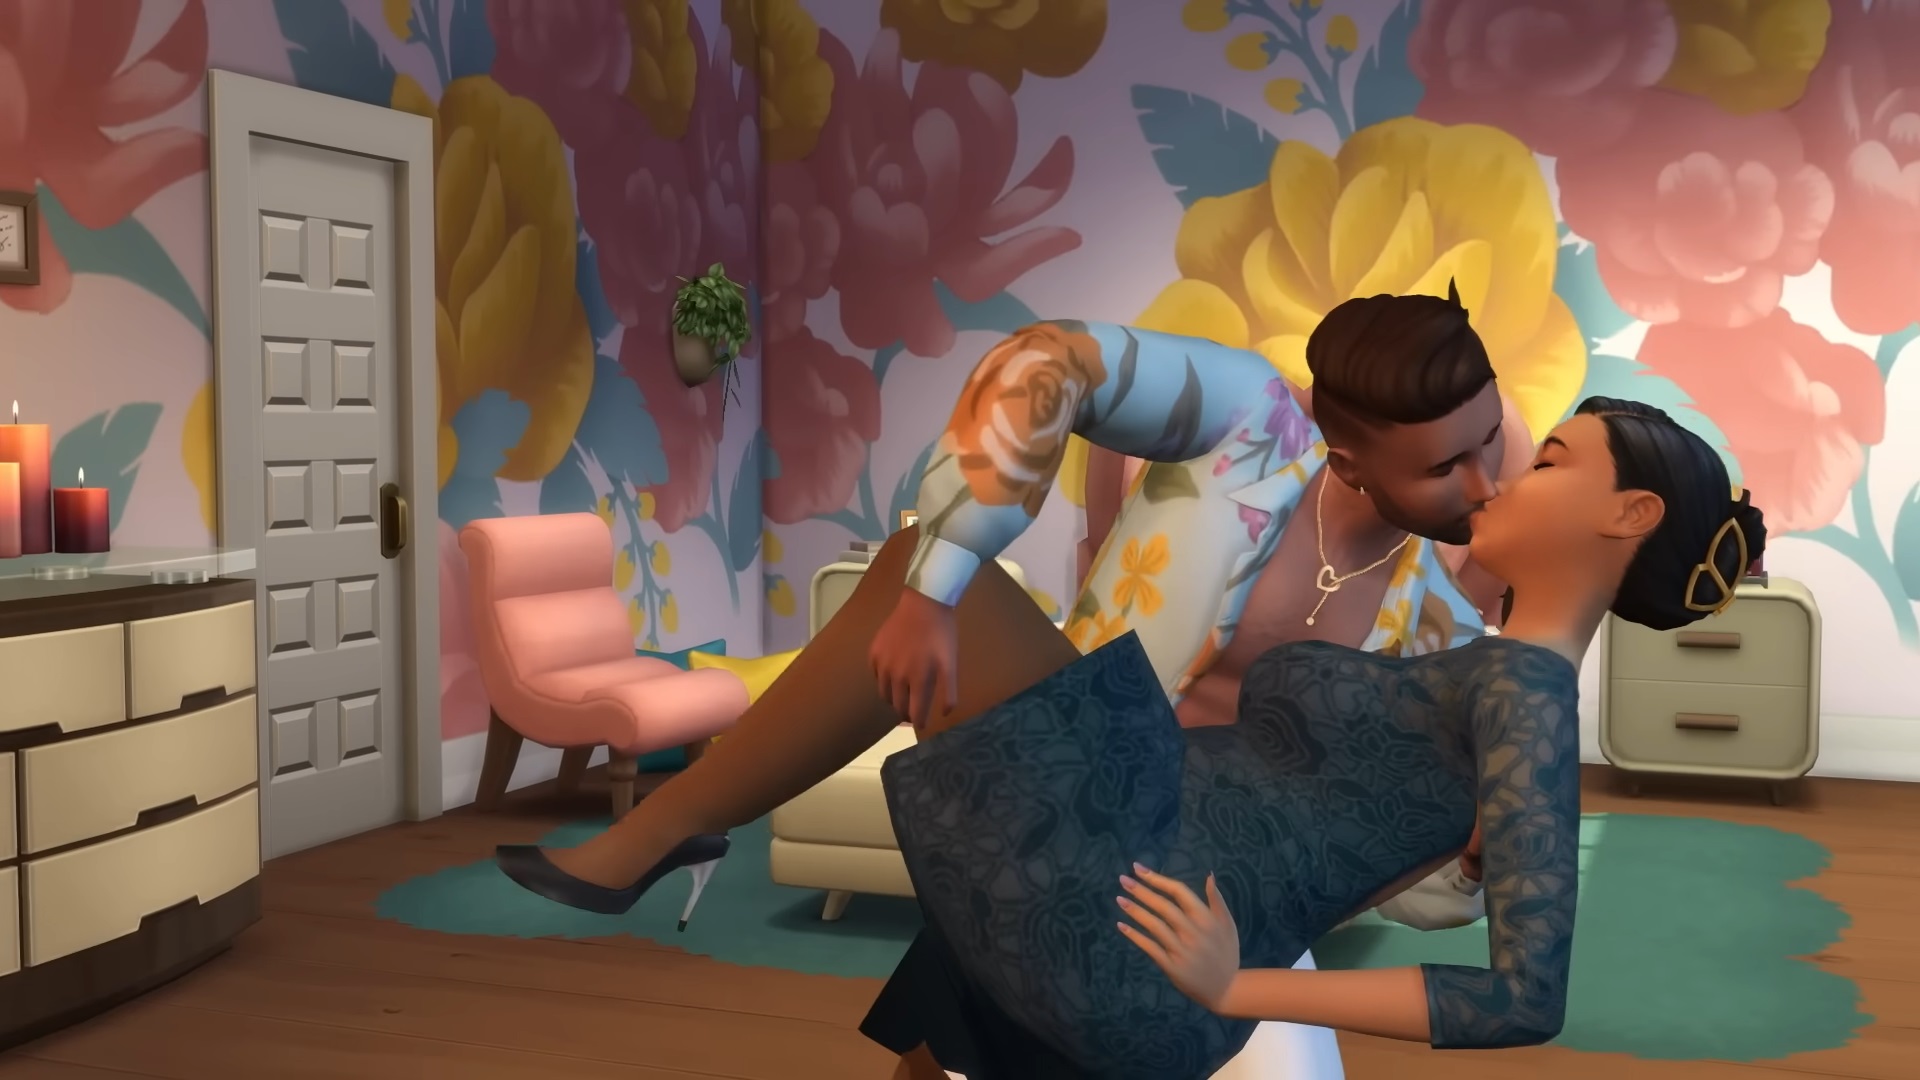 The Sims 4 Lovestruck - one Sim dips another Sim into a kiss in a bedroom